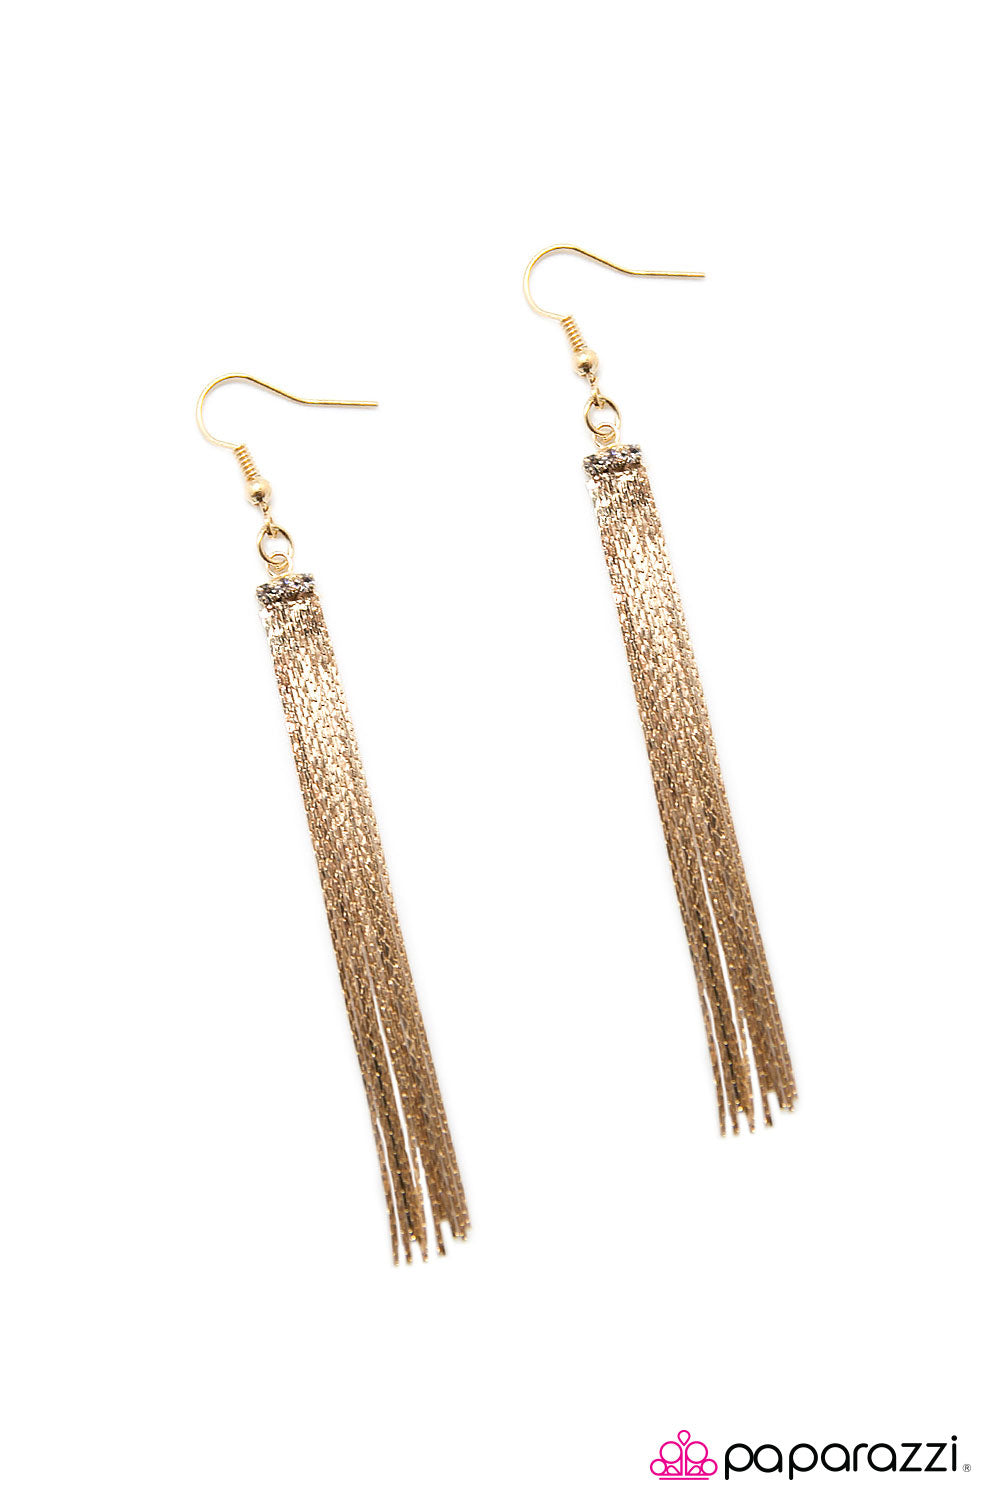 Paparazzi Accessories Night At The Oscars - Gold Earring - Be Adored Jewelry